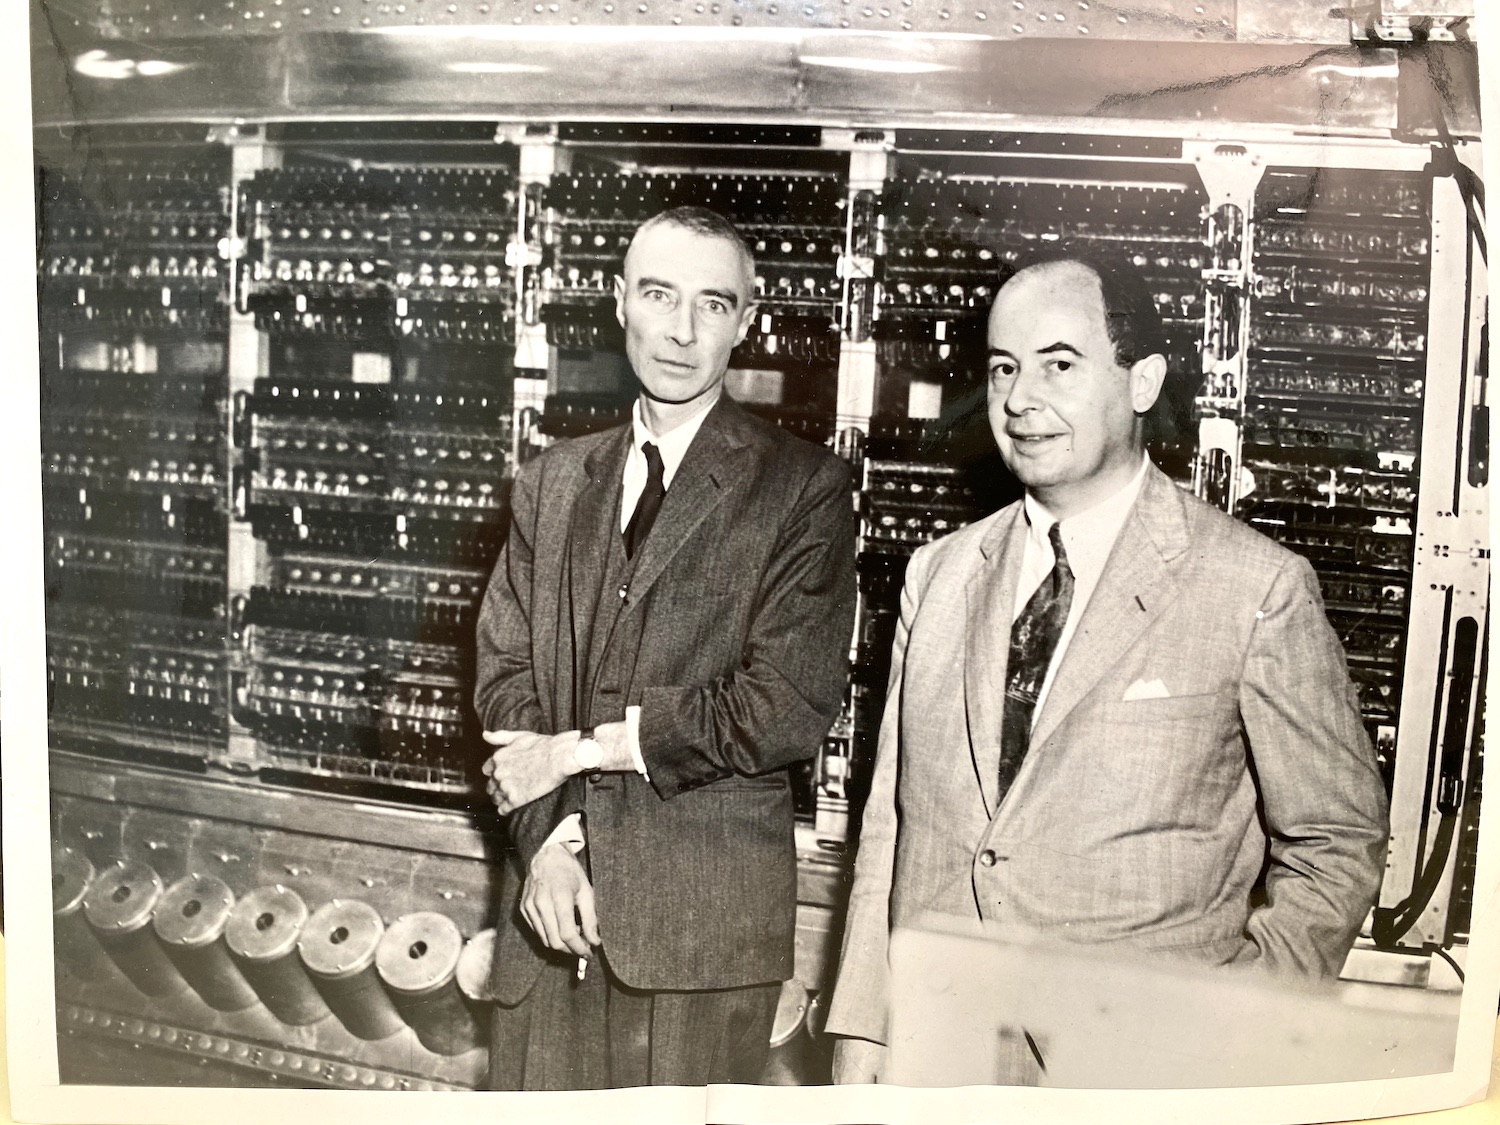 Robert Oppenheimer (left) and John von Neumann in front of the Princeton IAS computer on the day it was announced to the public.